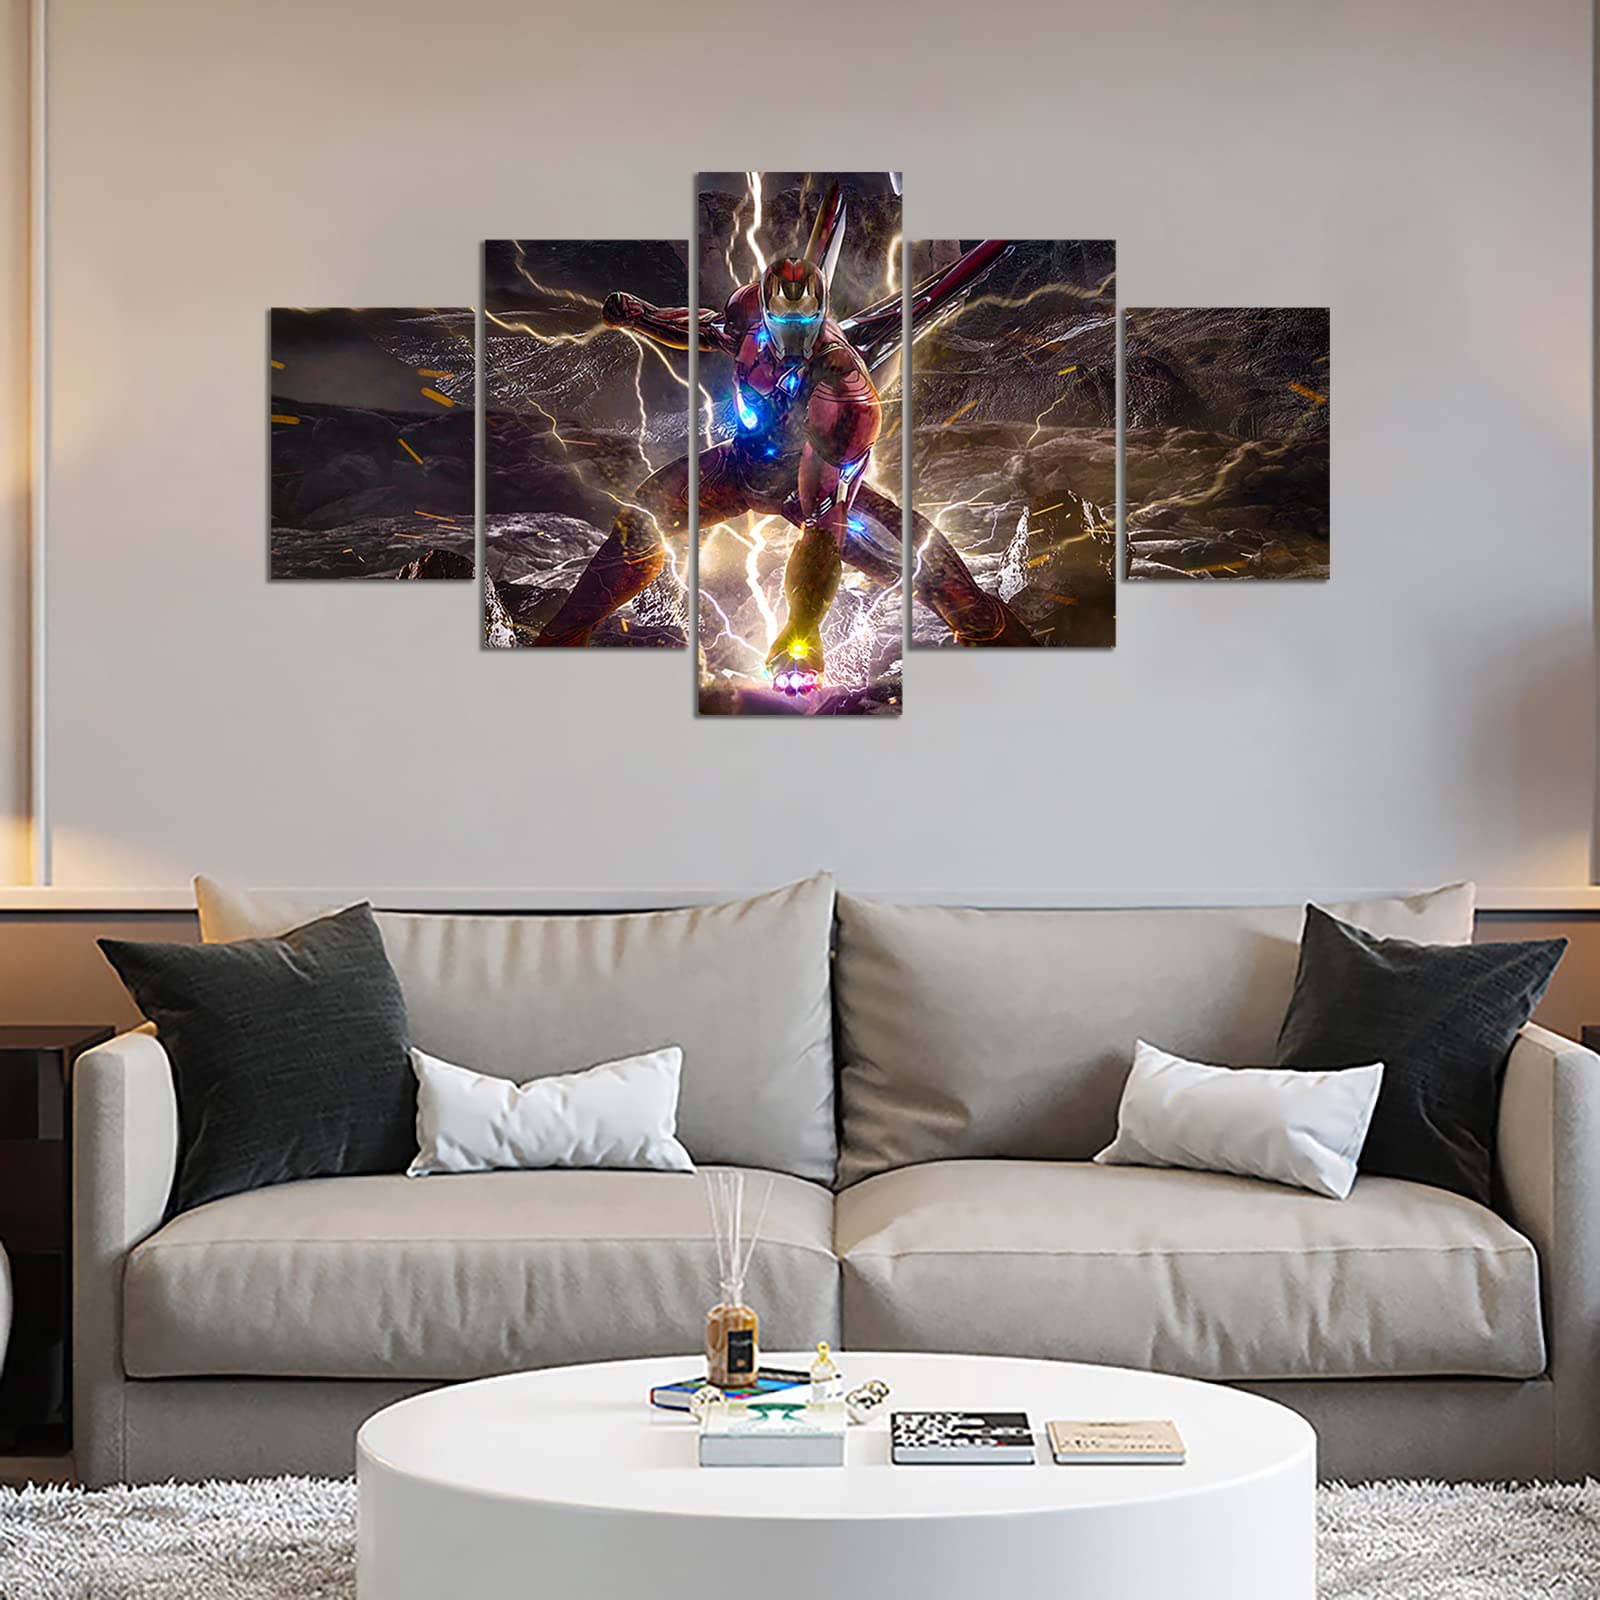 12"x22"Iron Man HD Canvas print Painting Home decor Poster Room Wall art Picture 